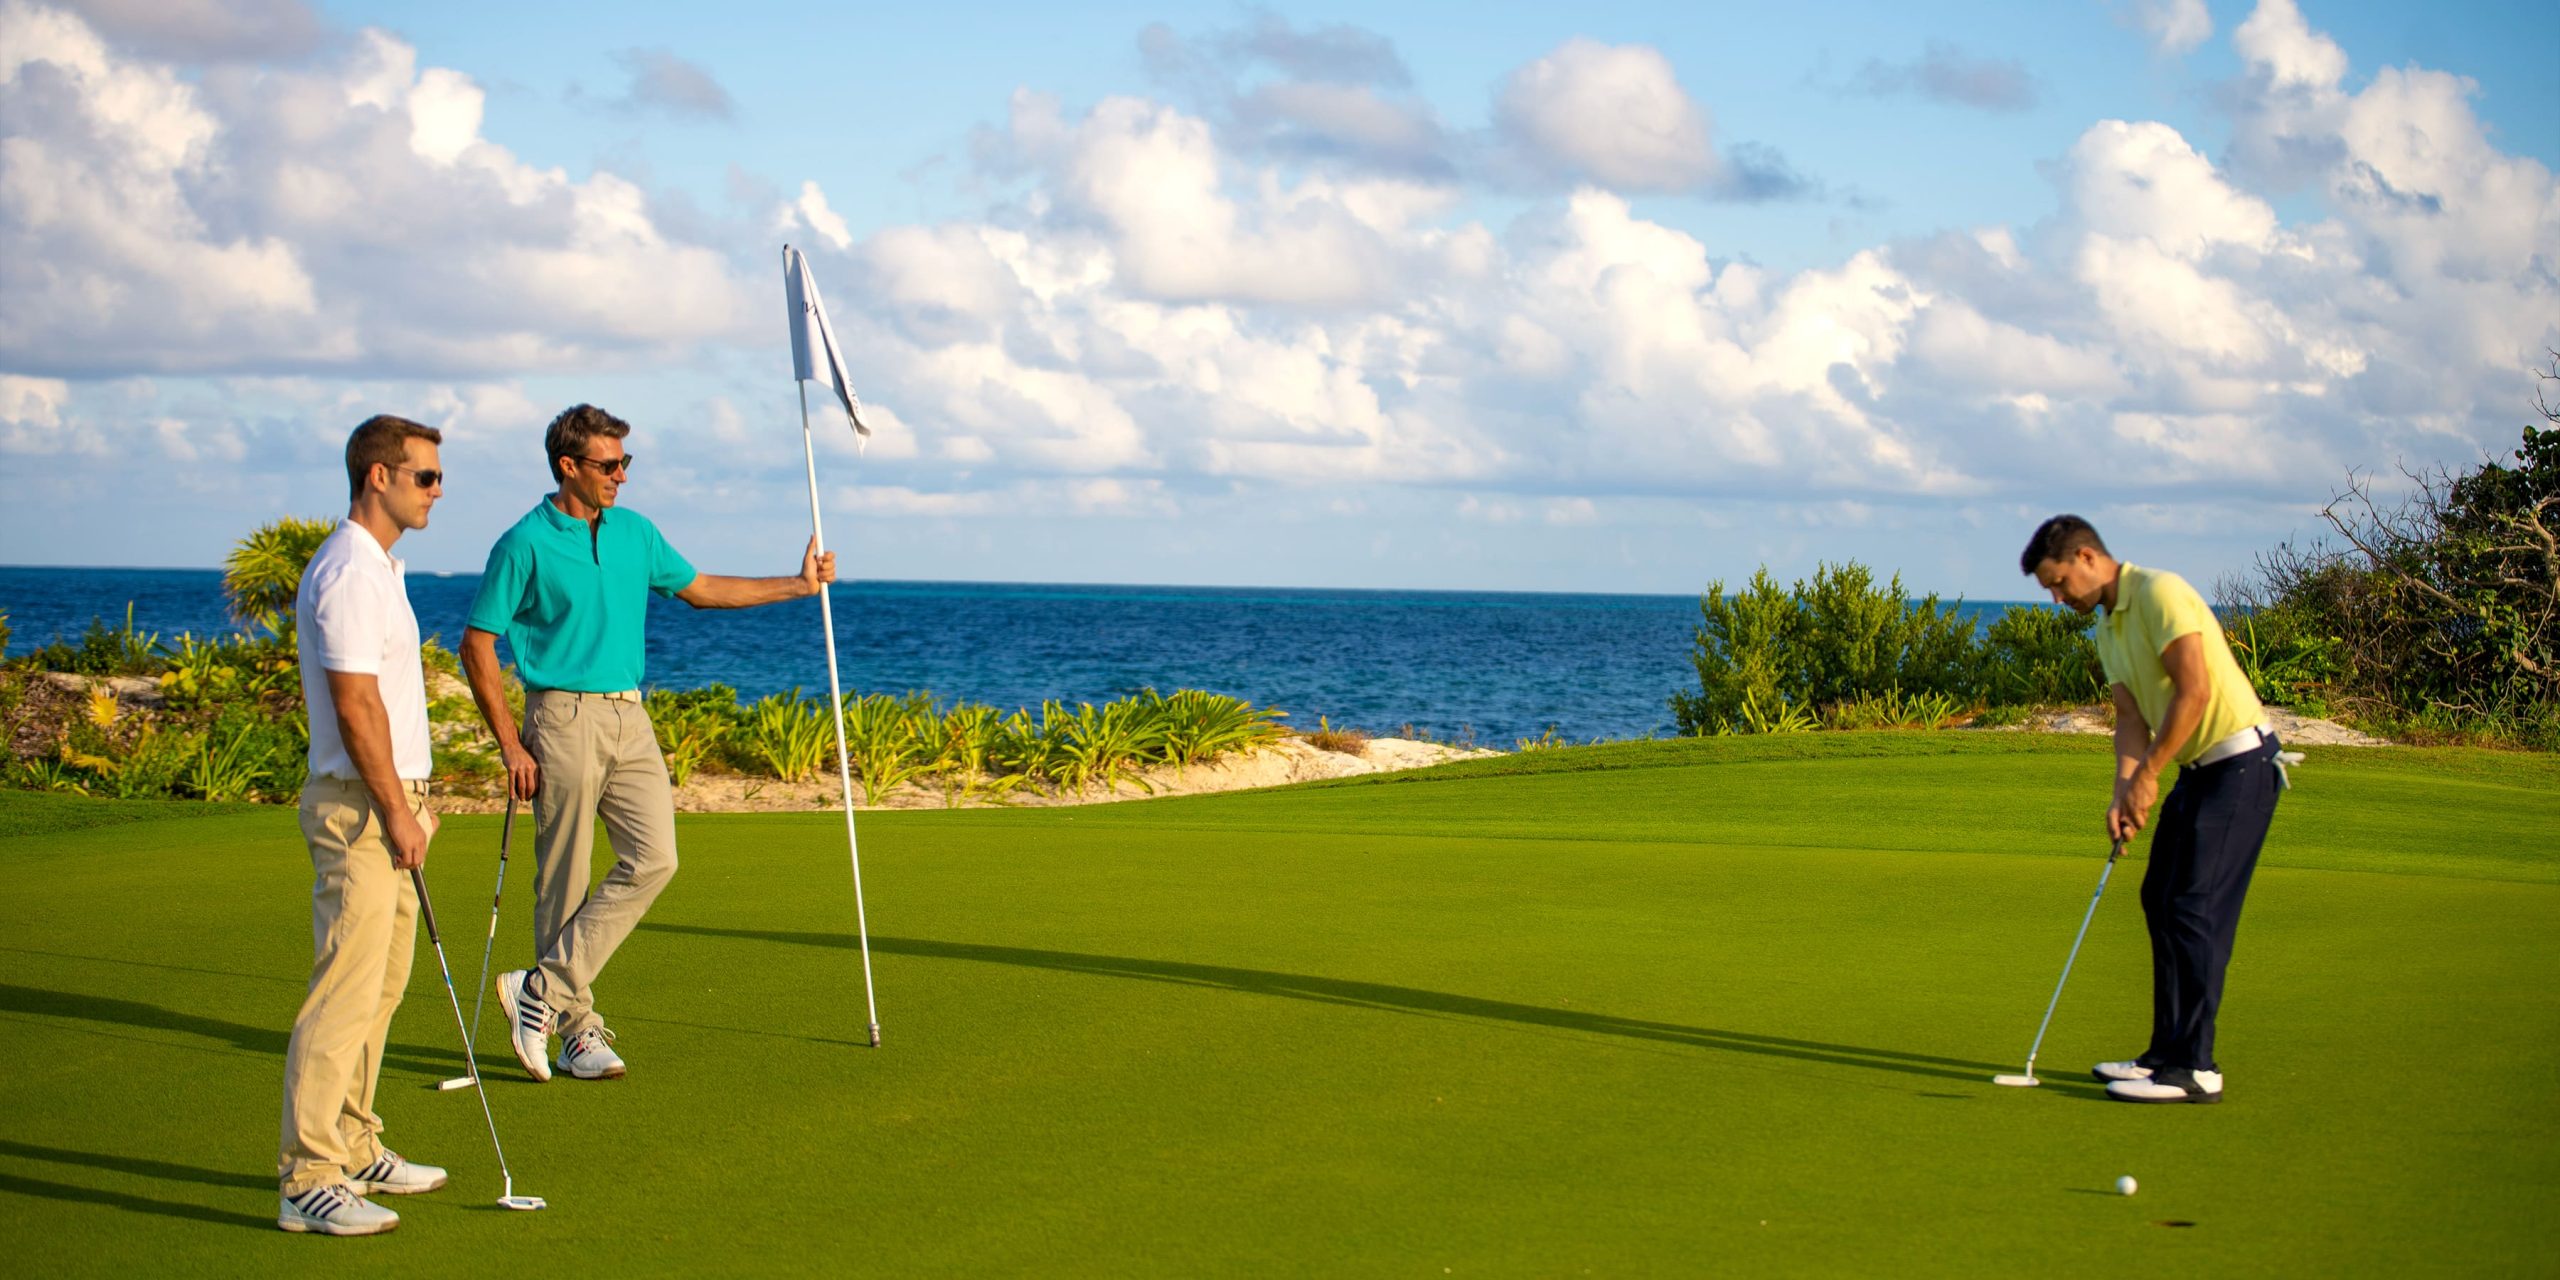 Cancun and the Riviera Maya boast a variety of golf courses designed by renowned architects, each offering its own unique charm and challenges. Whether you're a seasoned pro or a beginner golfer, you'll find a course that suits your skill level and provides an enjoyable round of golf.